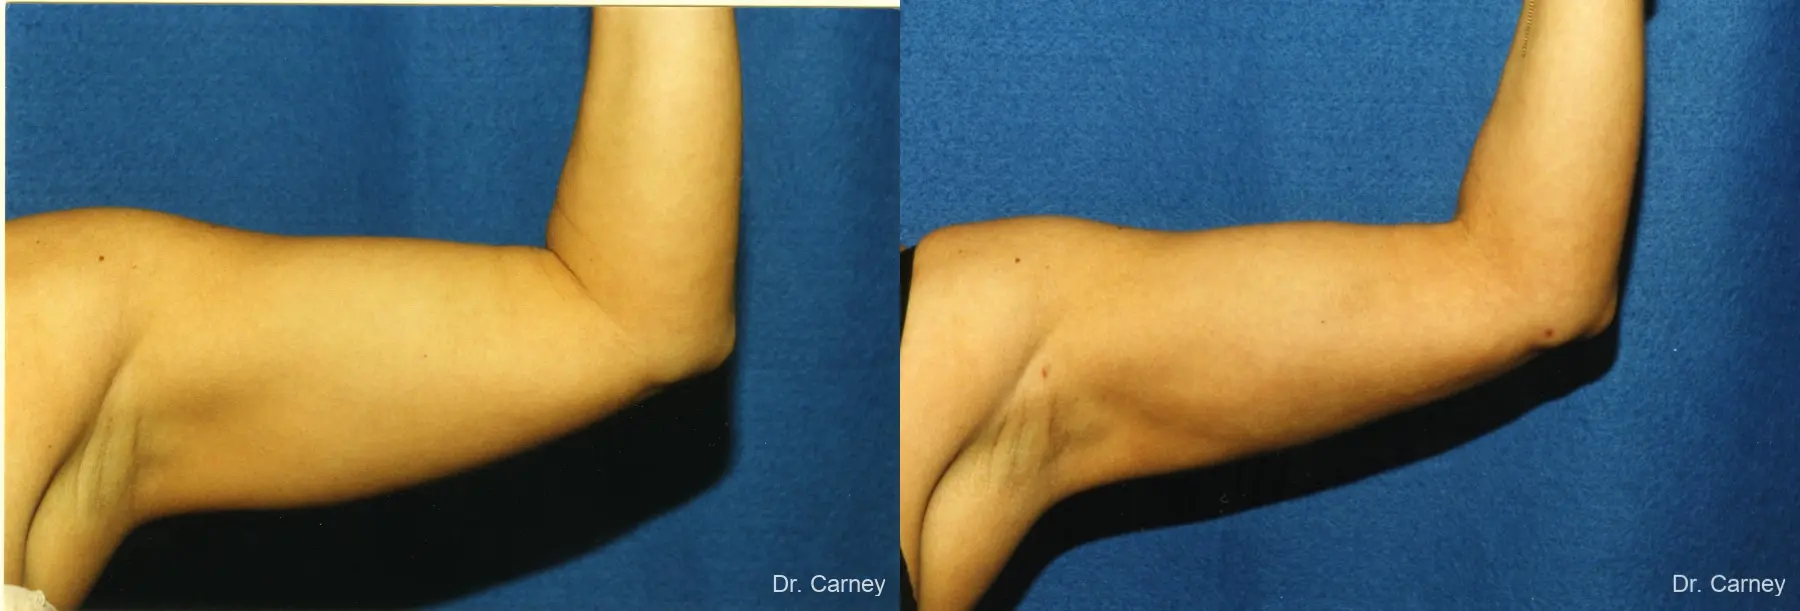 Virginia Beach Brachioplasty 1141 - Before and After